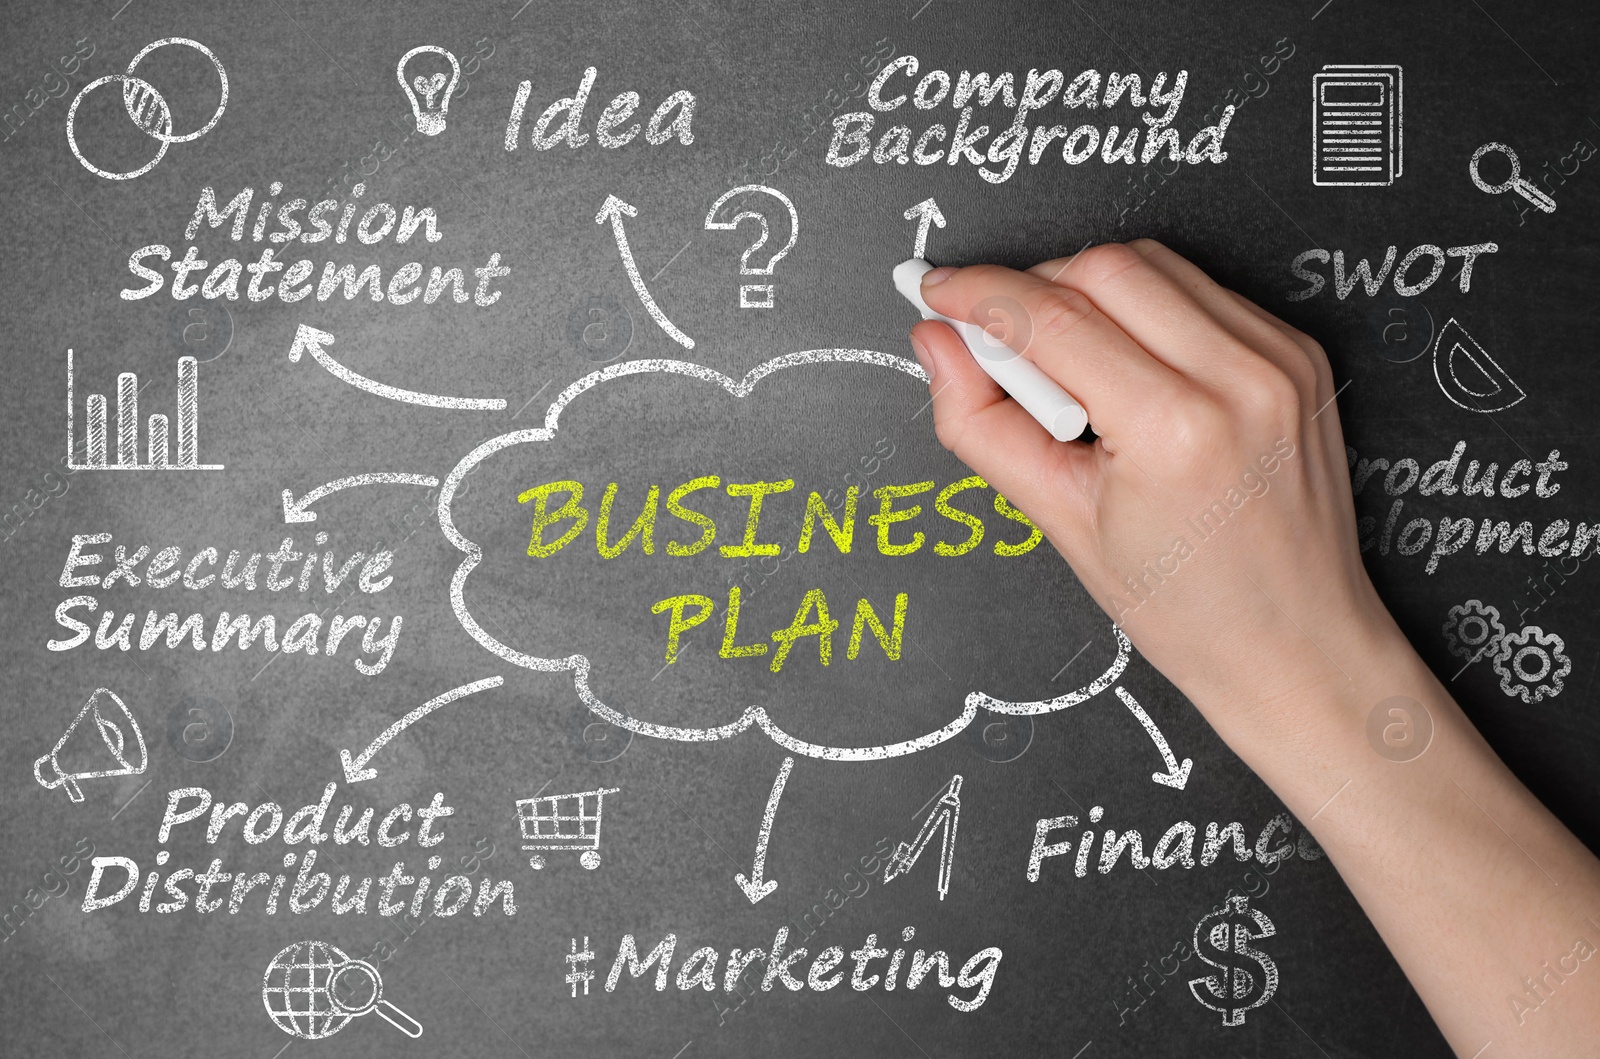 Image of Woman drawing business plan scheme with important components on blackboard, top view